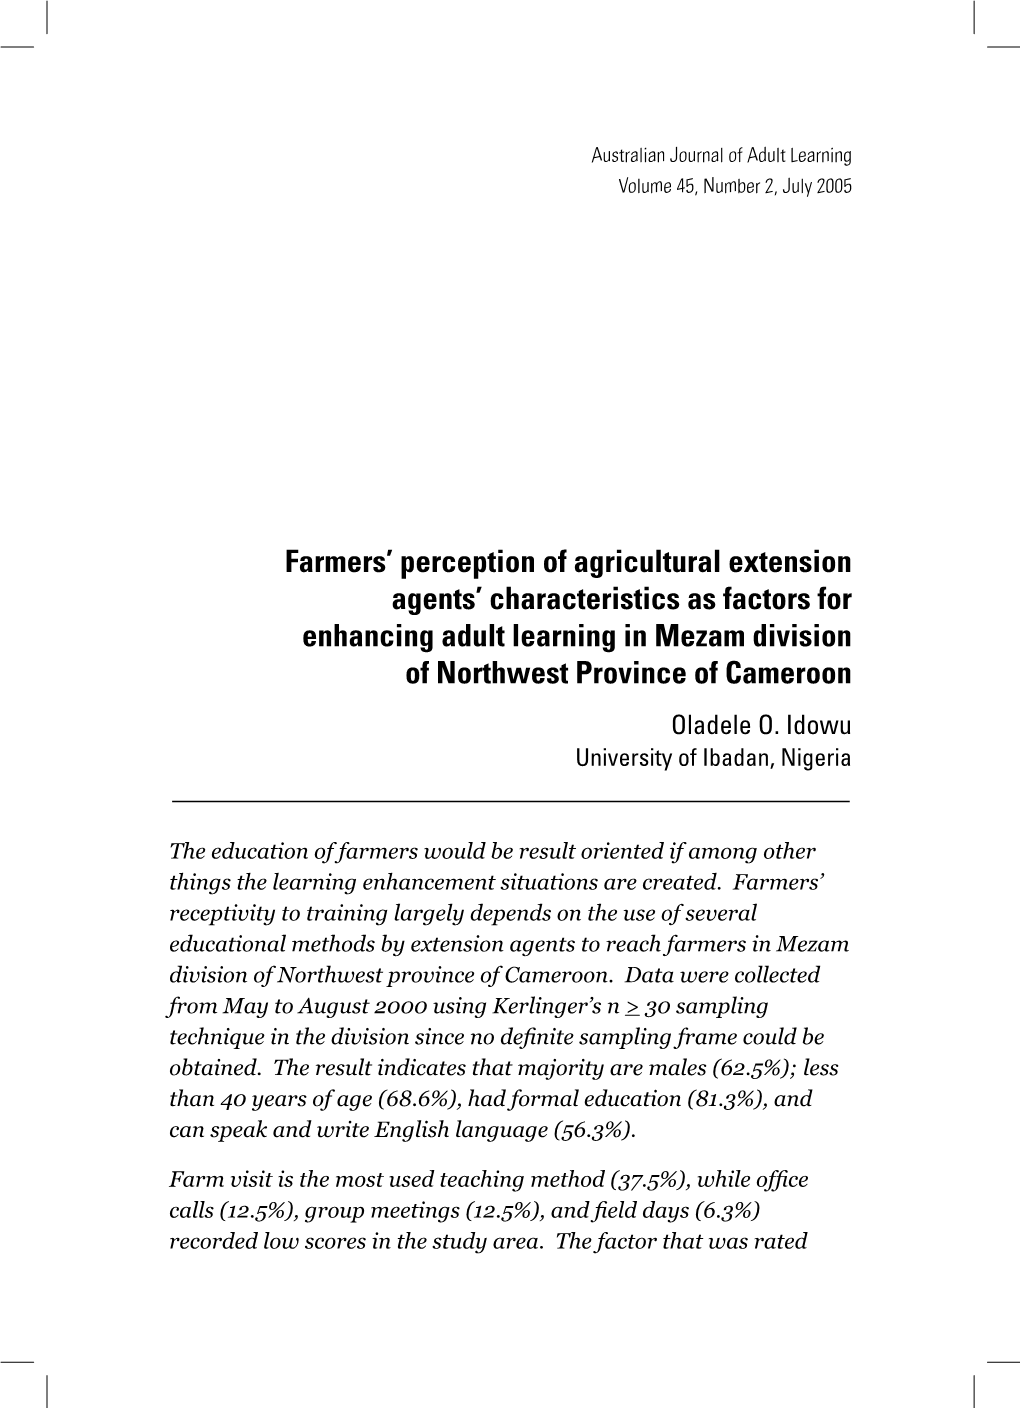 Farmers' Perception of Agricultural Extension Agents' Characteristics As